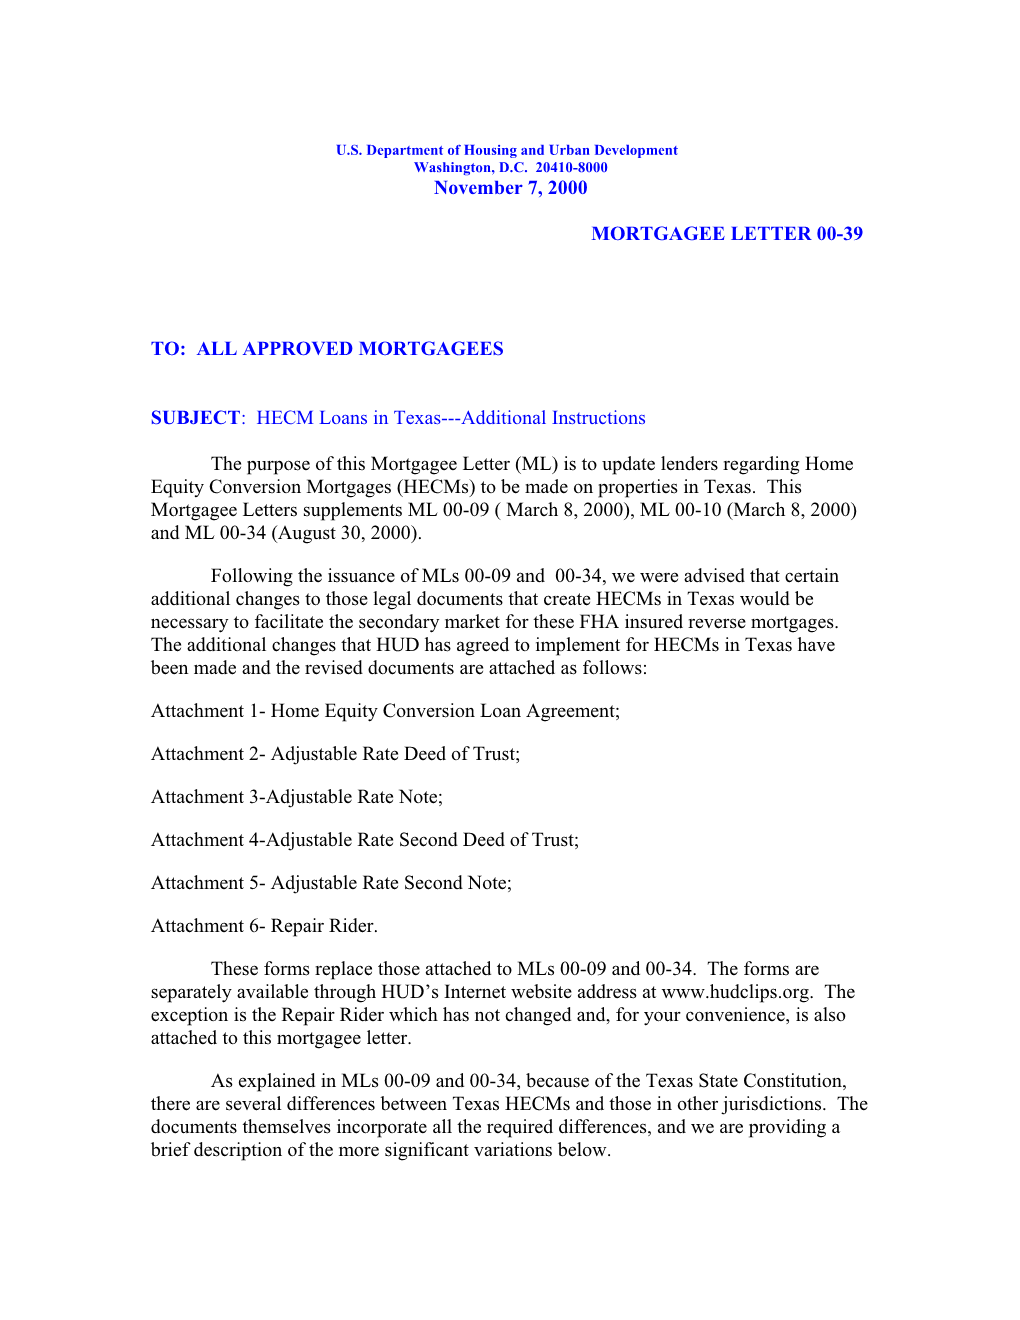 Mortgagee Letter on Hecm S in Texas